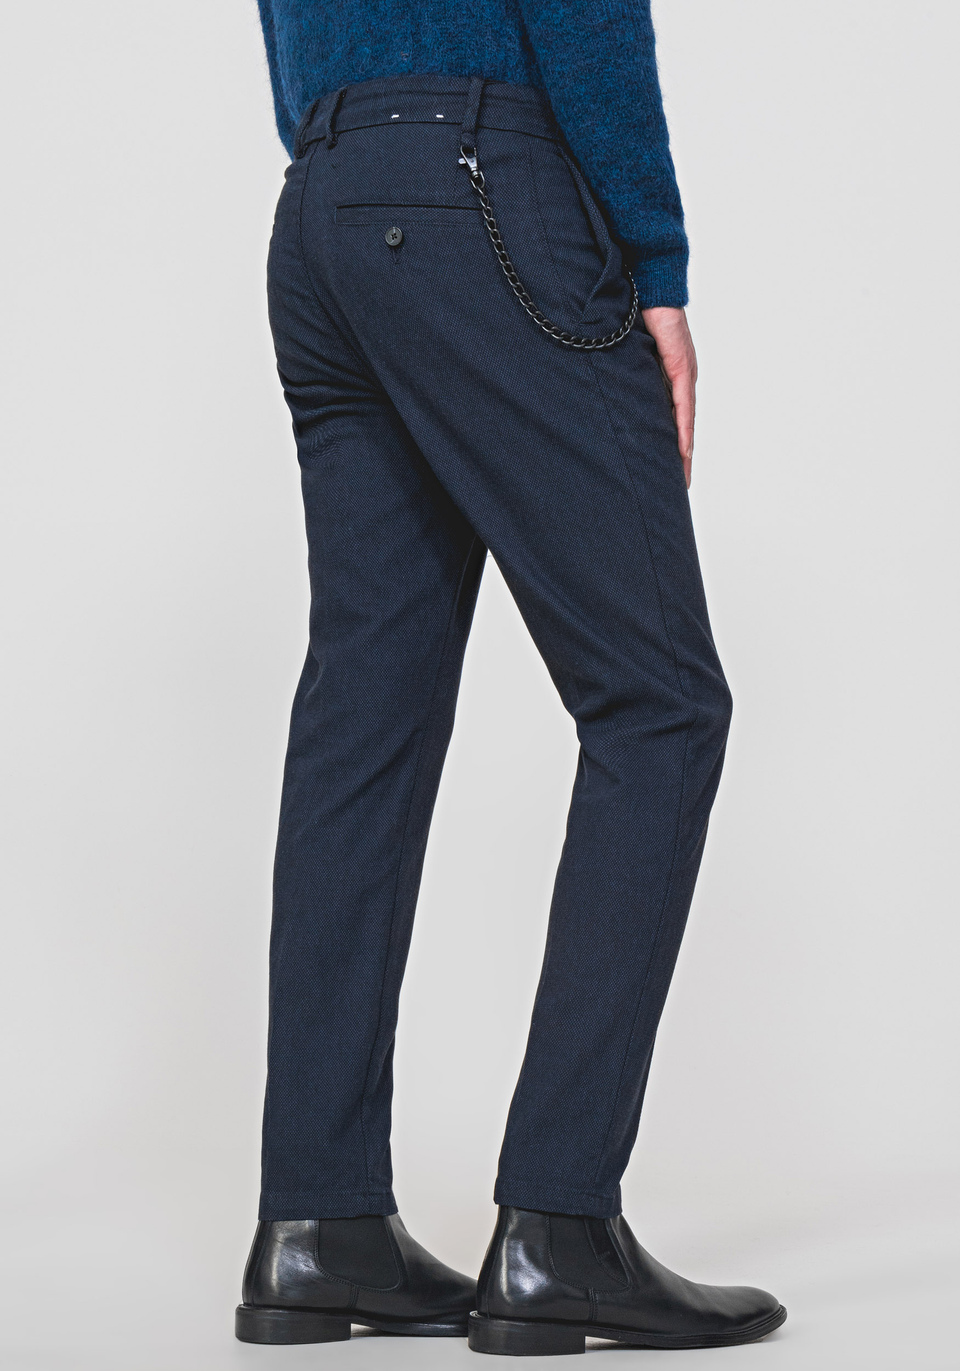 SLIM-FIT “KERR” TROUSERS MADE OF STRETCH COTTON WITH MICRO-PATTERN - Antony Morato Online Shop